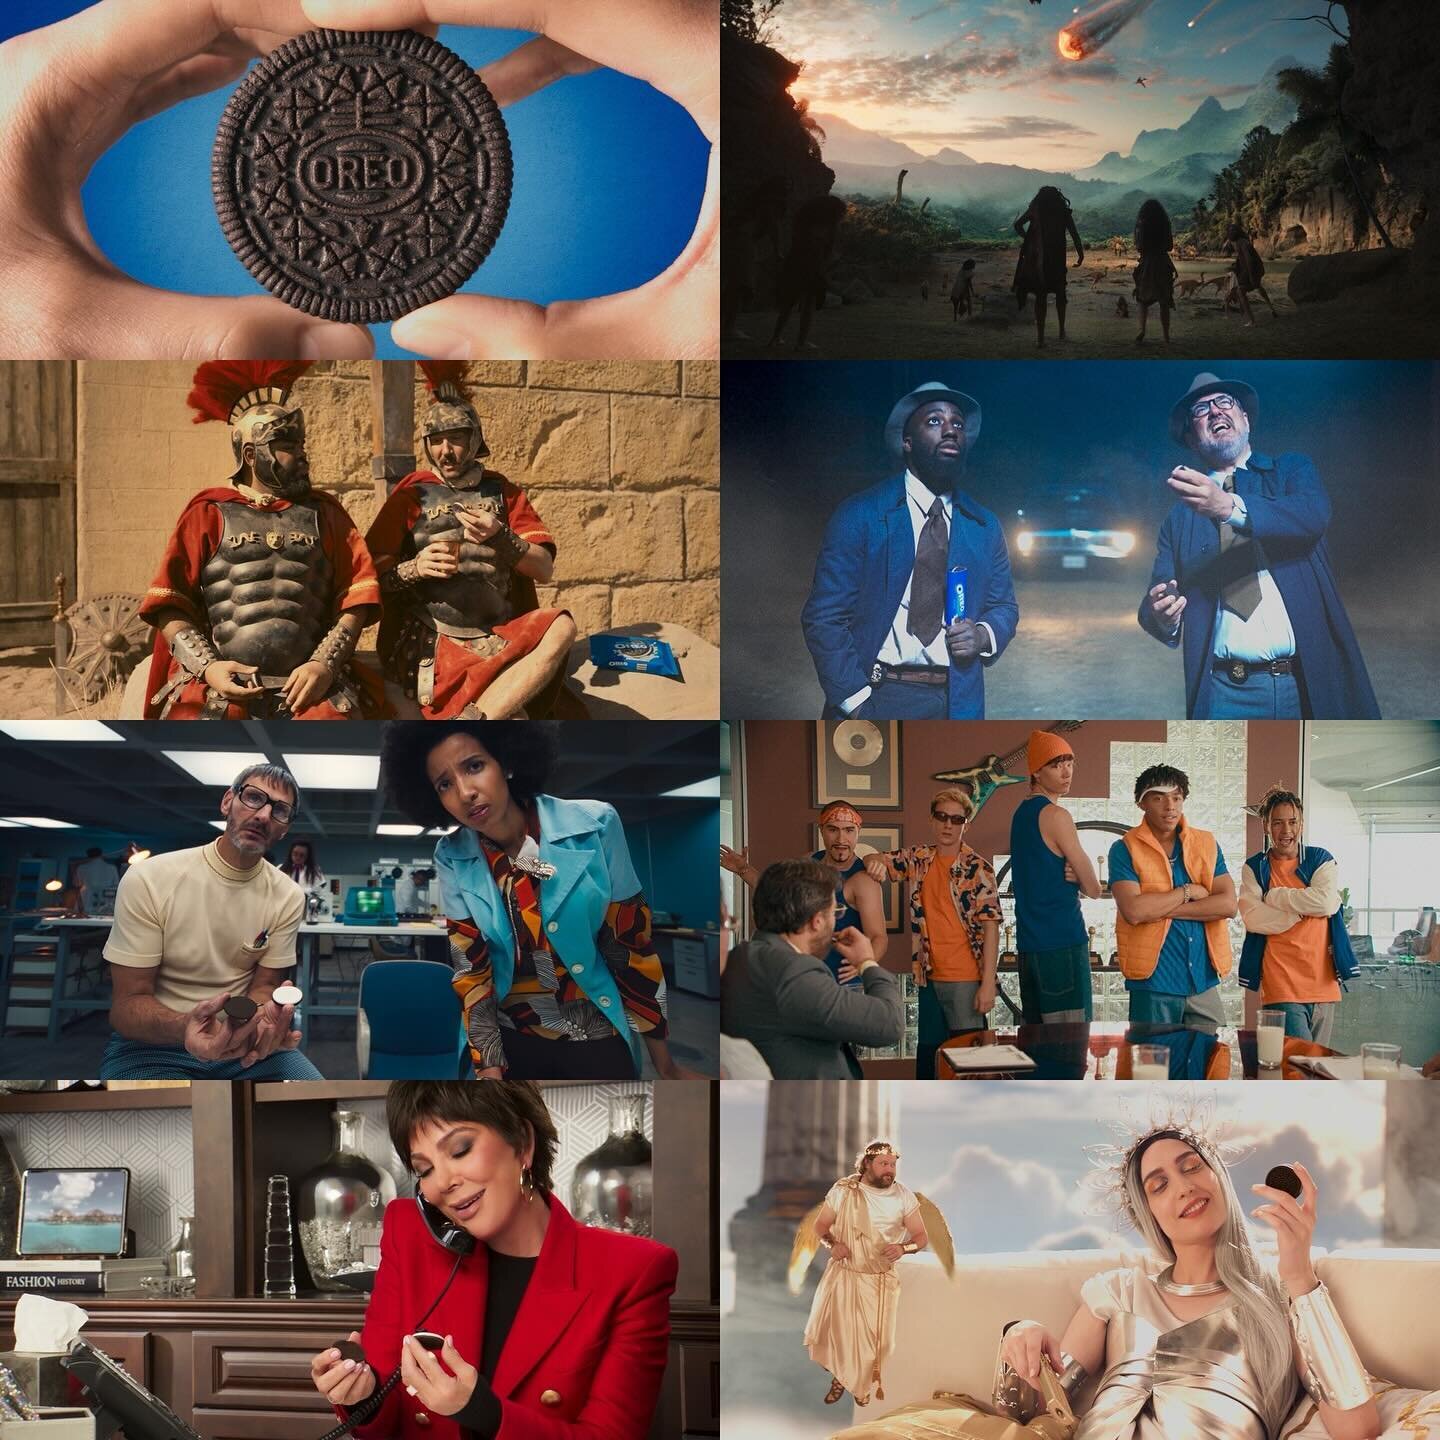 An epic project, with the best team. Thank you all!

OREO: Twist On It (Super Bowl LVIII)

Brand - Mondelez International, Inc.&nbsp;
Creative Agency - The Martin Agency
Production Agency - PXP
Production - Hungry Man and Tonic/Flo Films
Edit/VFX/Col